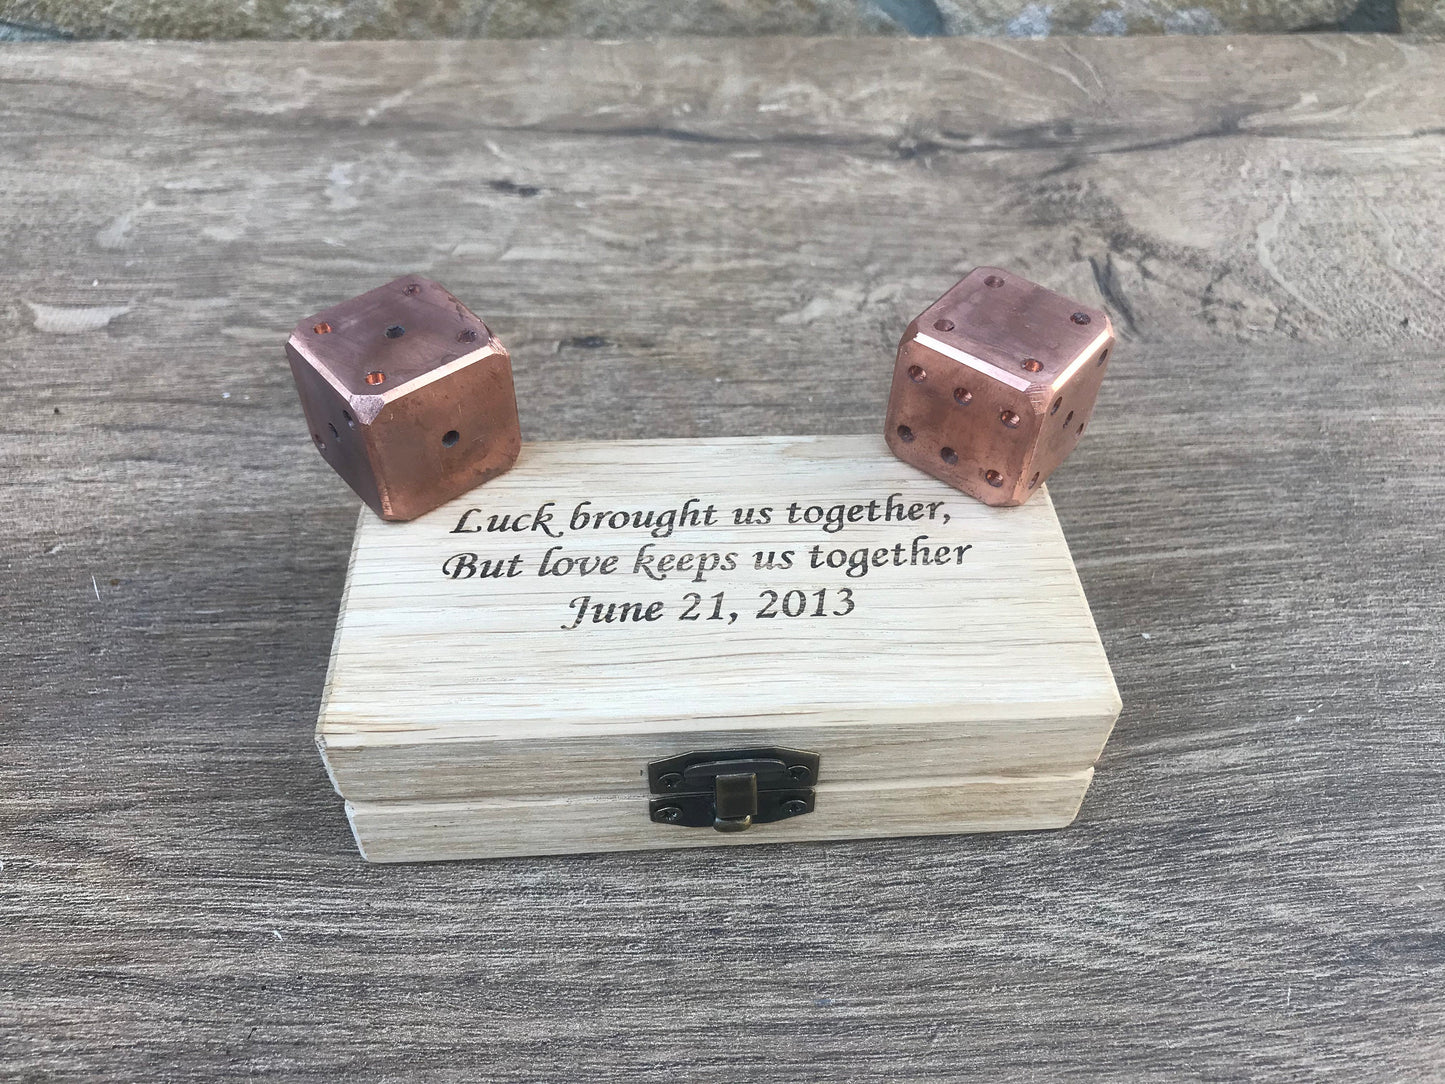 Copper anniversary, copper gift, copper dices, dice box, gift box, engraved gift, personalized gift, dice games, tabletop game, board game